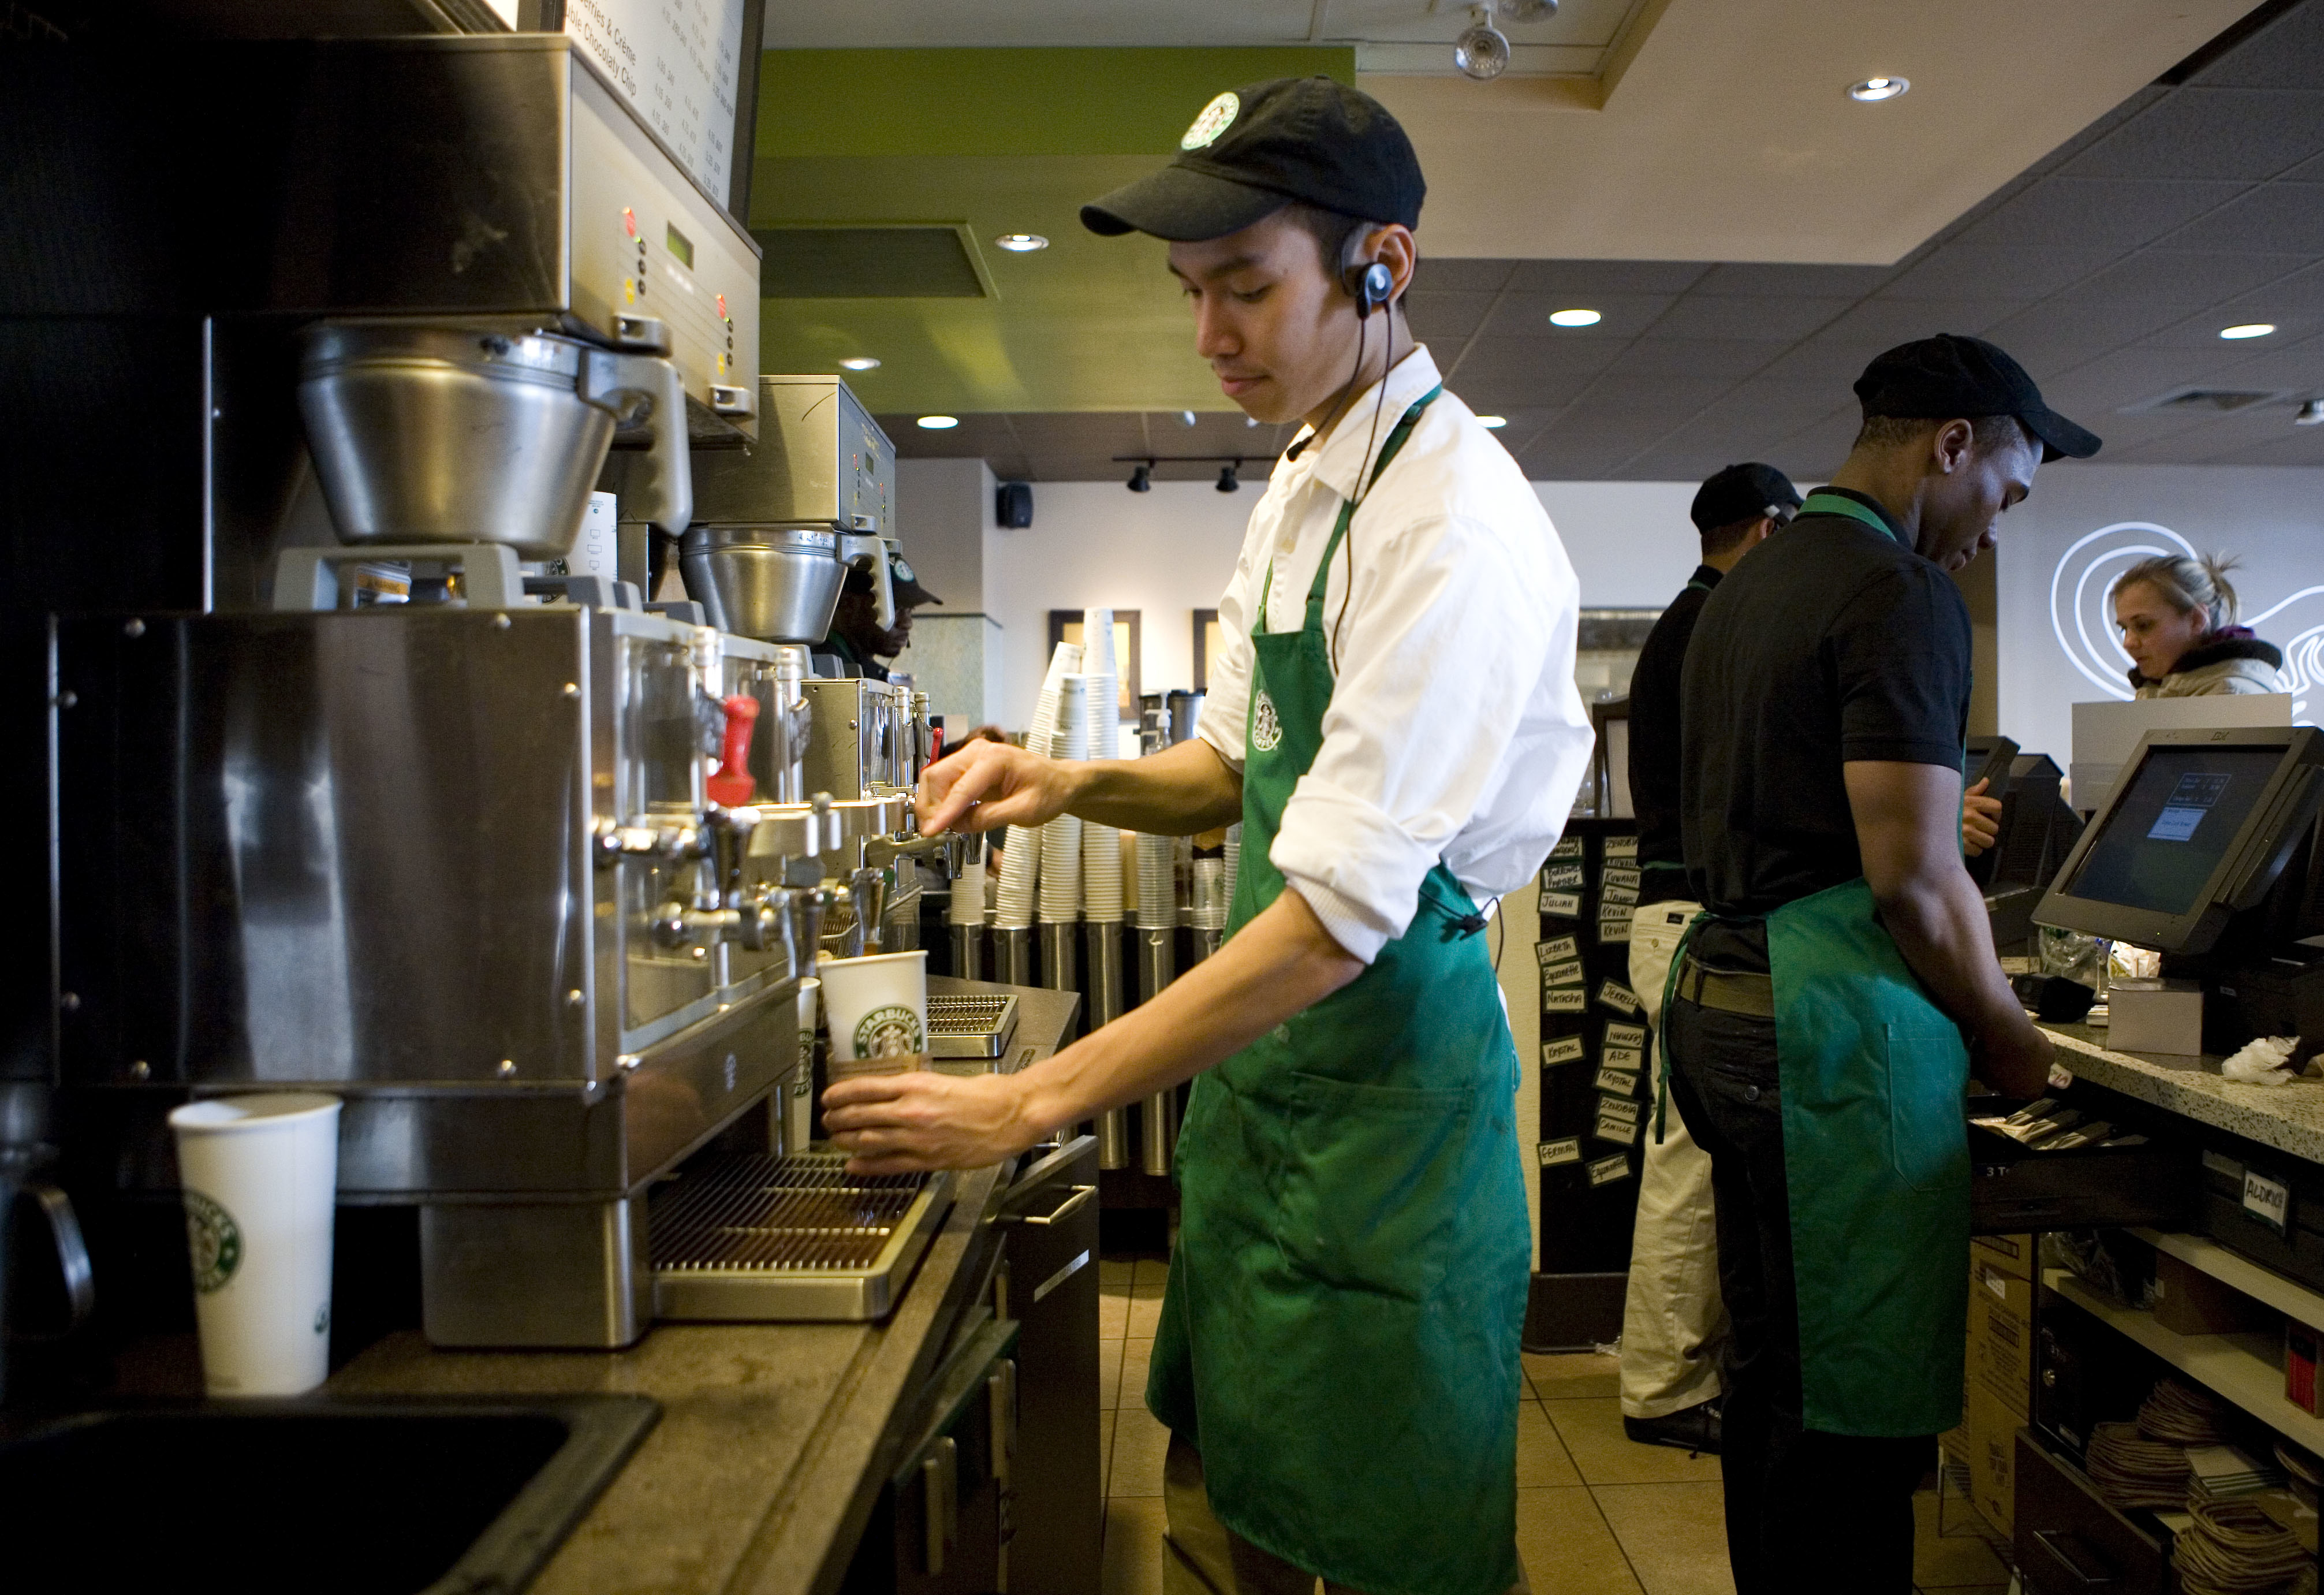 District manager jobs for starbucks